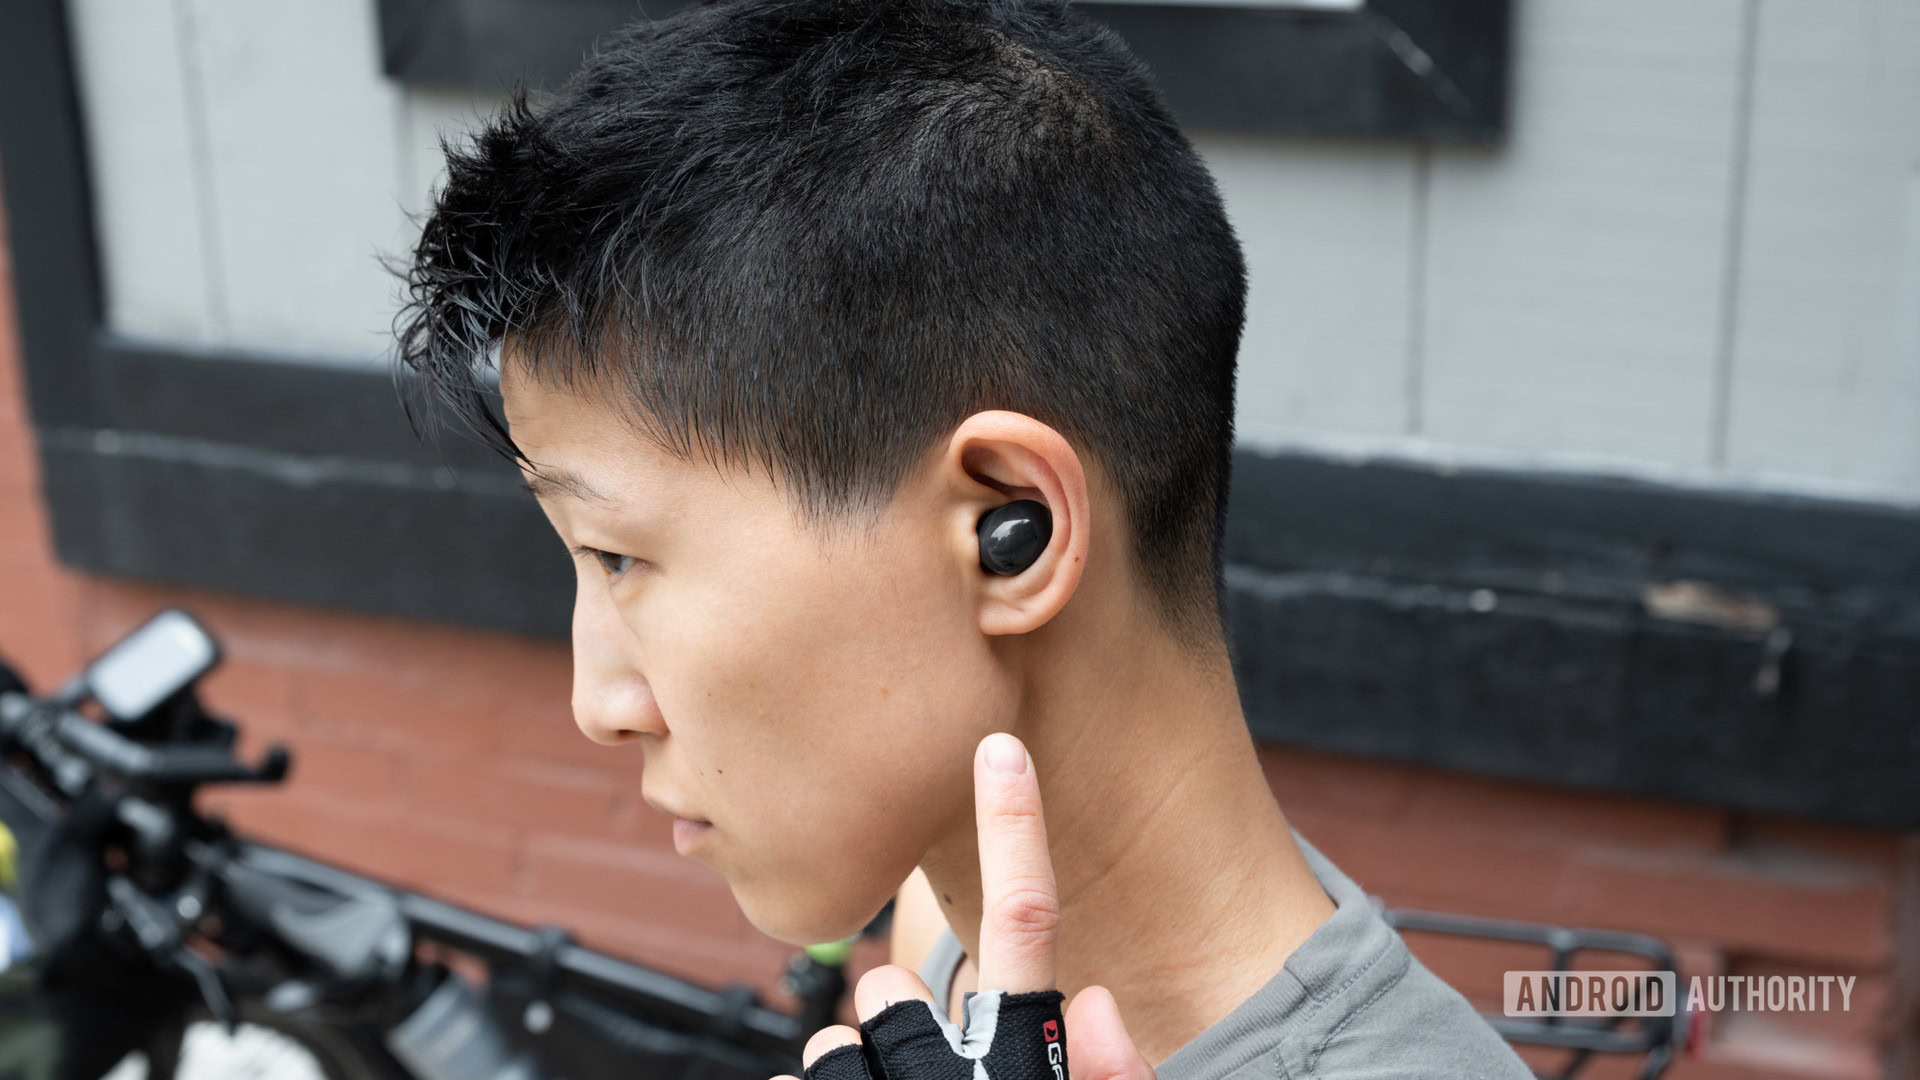 Samsung Galaxy Buds 2 review: Mighty good sound, affordable price